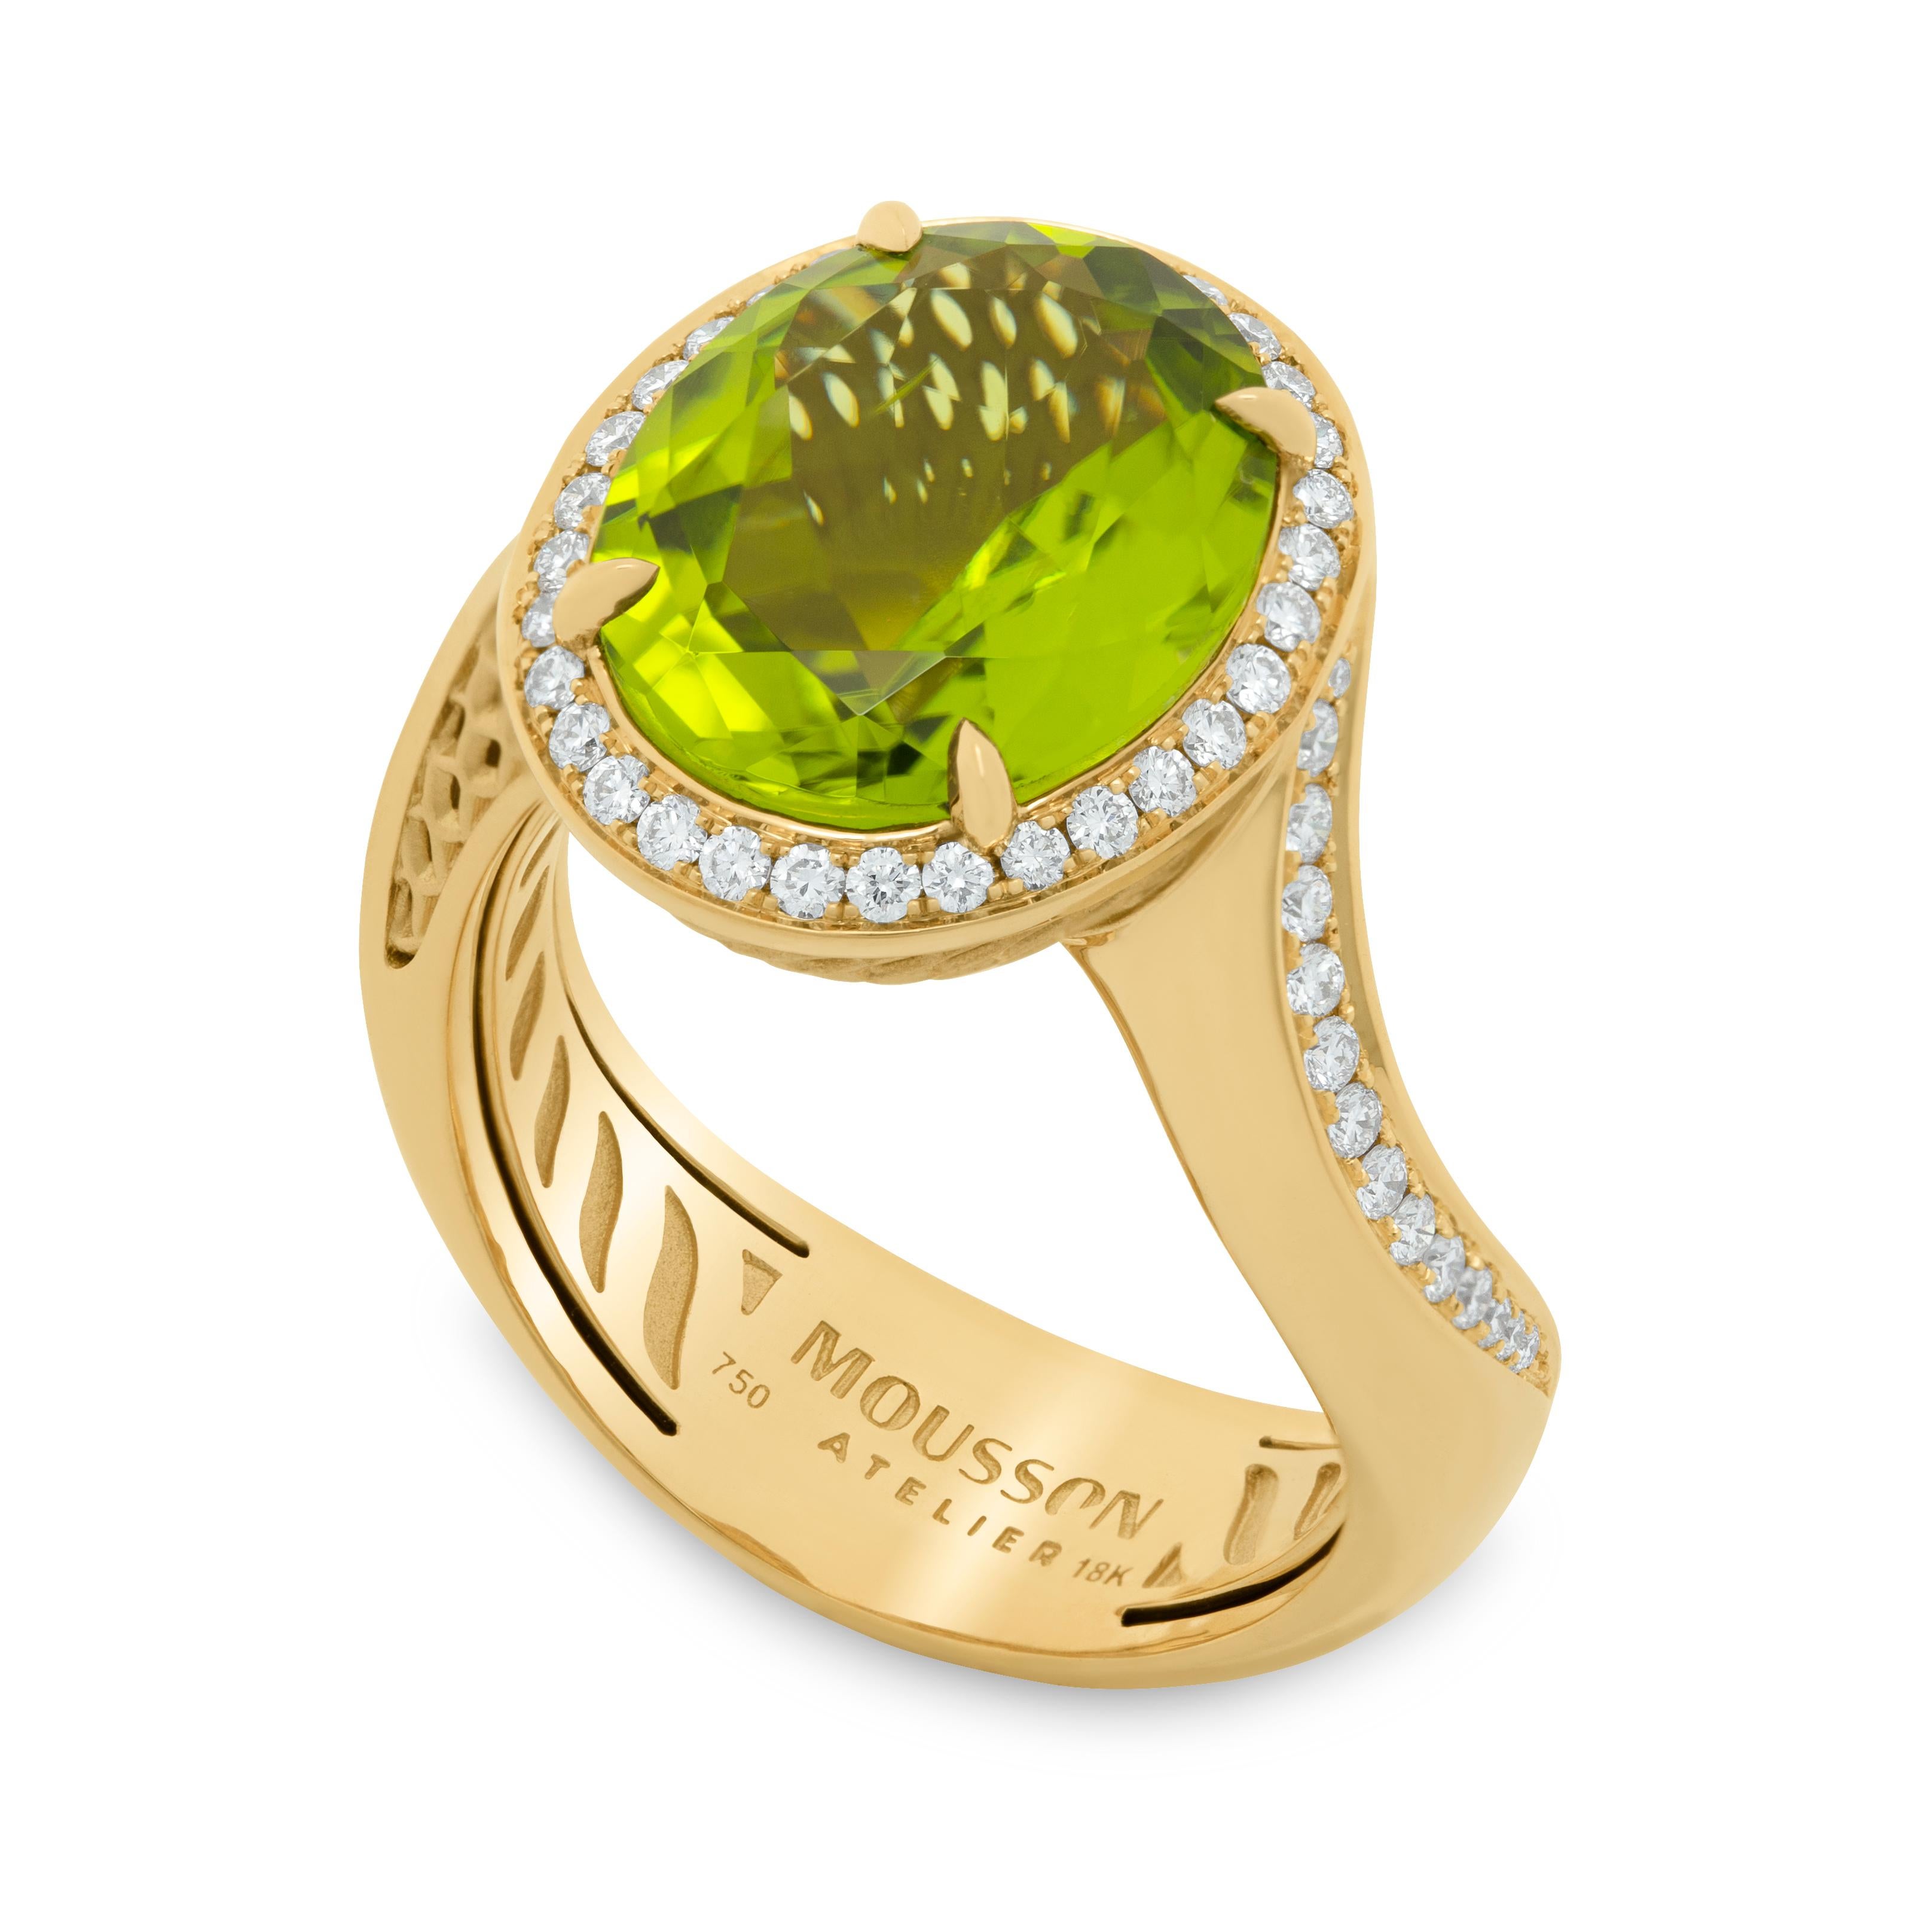 Peridot 4.82 Carat Diamonds 18 Karat Yellow Gold New Classic Ring
We have published a series of new Rings with the same idea but with different details. Introducing a Ring crafted from 18 Karat Yellow Gold, which in a trio with 4.82 Carat Peridot